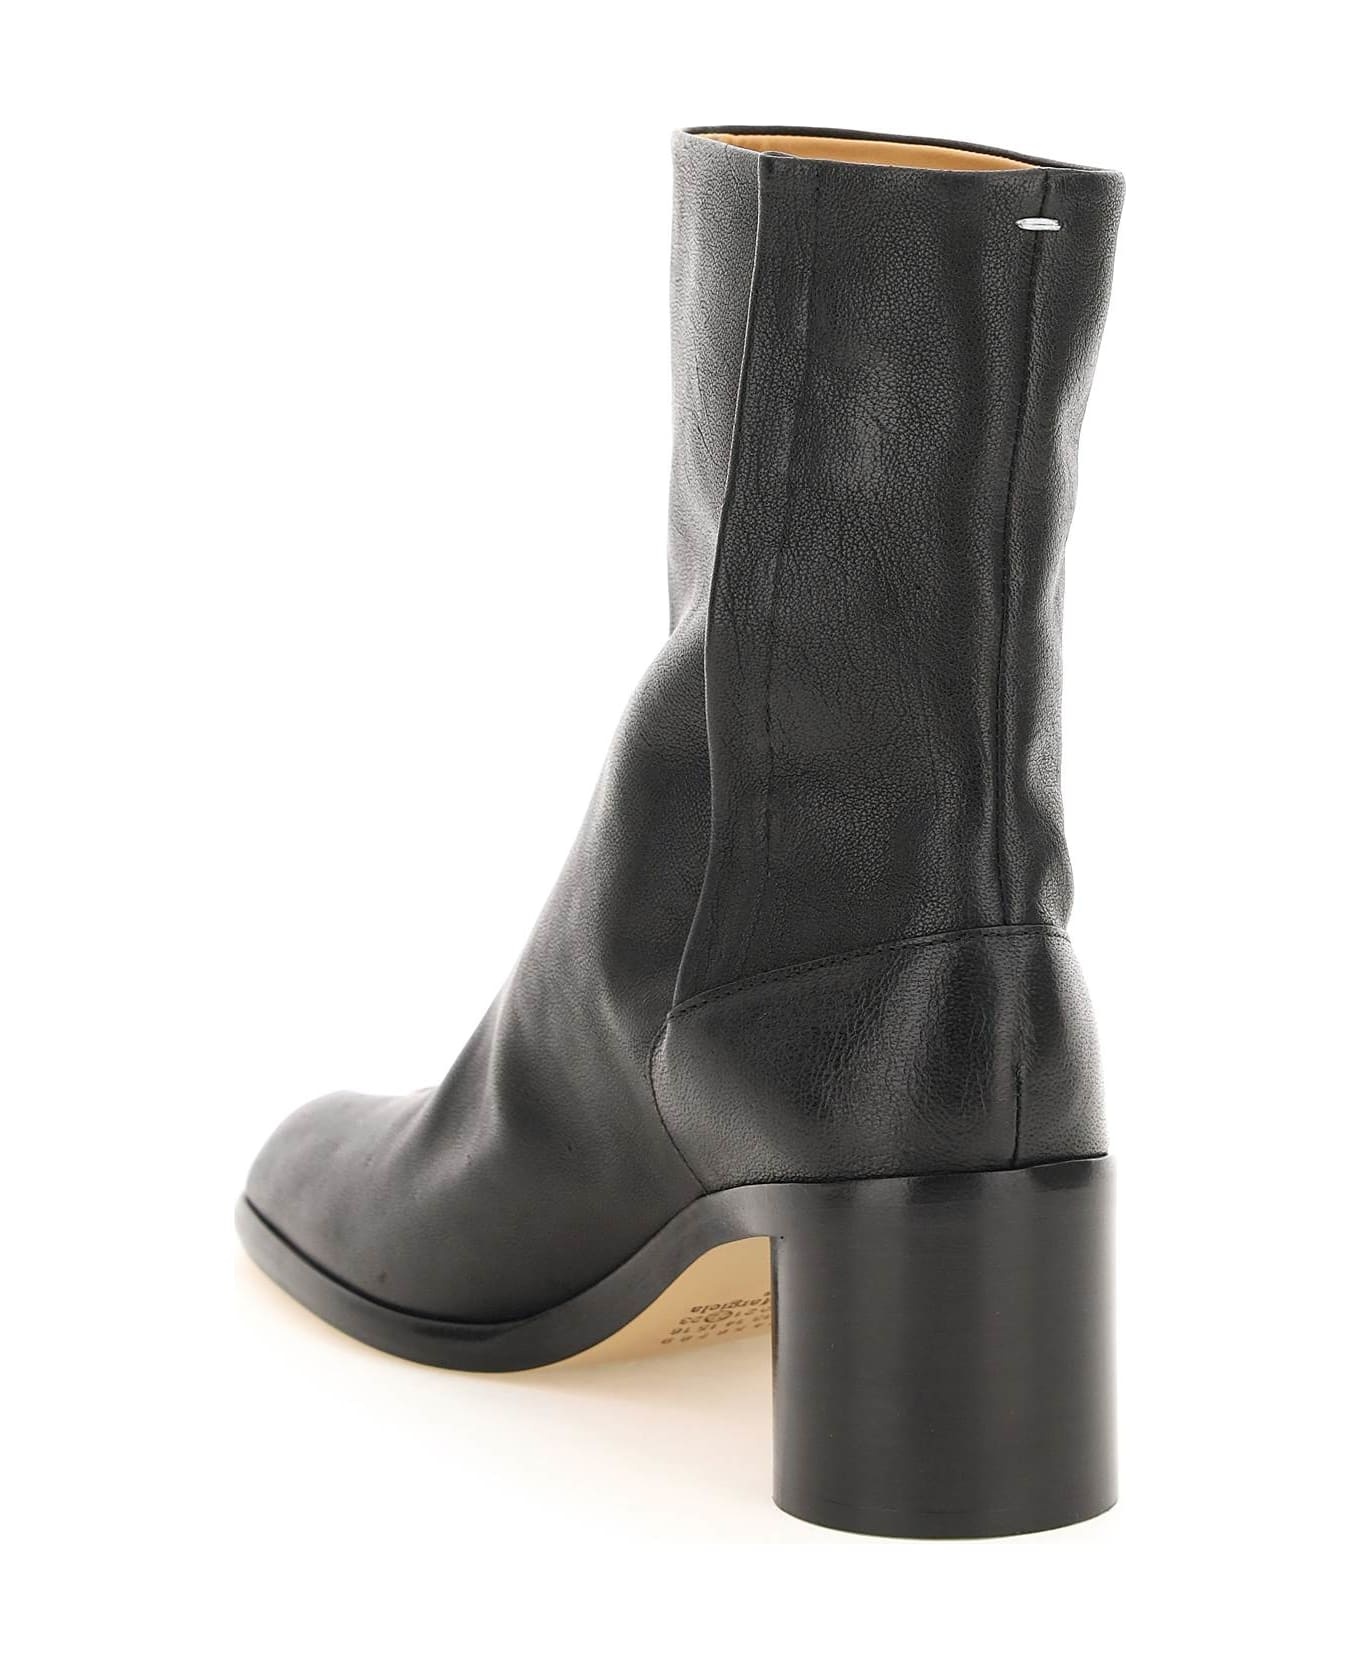 'tabi' Ankle Boots - 3